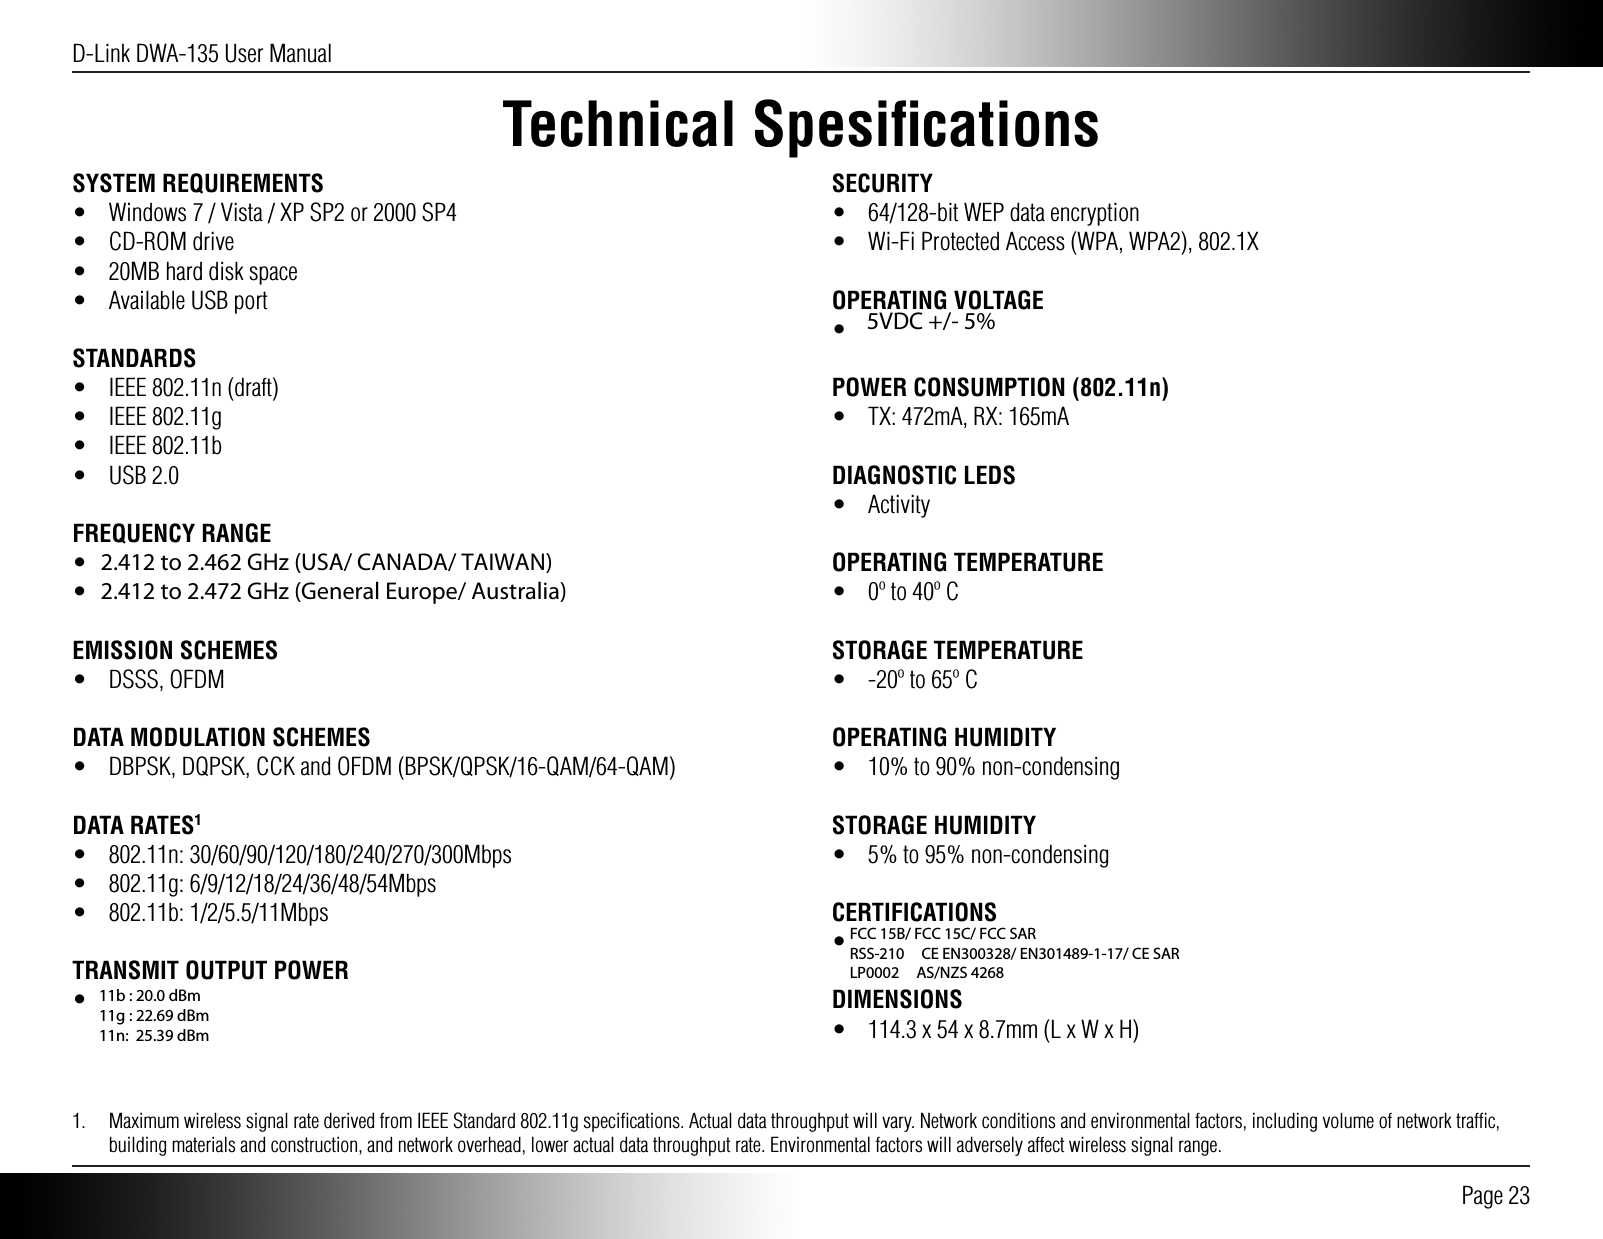 D-Link DWA-135 User Manual Page 23Technical SpesiﬁcationsSYSTEM REQUIREMENTS•  Windows 7 / Vista / XP SP2 or 2000 SP4• CD-ROM drive•  20MB hard disk space•  Available USB portSTANDARDS•  IEEE 802.11n (draft)• IEEE 802.11g• IEEE 802.11b• USB 2.0FREQUENCY RANGE•  2.412 to 2.462 GHz (North America)•  2.412 to 2.472 GHz (General Europe)EMISSION SCHEMES• DSSS, OFDMDATA MODULATION SCHEMES•  DBPSK, DQPSK, CCK and OFDM (BPSK/QPSK/16-QAM/64-QAM)DATA RATES1• 802.11n: 30/60/90/120/180/240/270/300Mbps• 802.11g: 6/9/12/18/24/36/48/54Mbps• 802.11b: 1/2/5.5/11MbpsTRANSMIT OUTPUT POWER•  14dbm (802.11 g/n), 18dbm (802.11 b)SECURITY•  64/128-bit WEP data encryption•  Wi-Fi Protected Access (WPA, WPA2), 802.1XOPERATING VOLTAGE•  5VDC +/- 10%POWER CONSUMPTION (802.11n)•  TX: 472mA, RX: 165mADIAGNOSTIC LEDS• ActivityOPERATING TEMPERATURE•  0º to 40º CSTORAGE TEMPERATURE•  -20º to 65º COPERATING HUMIDITY•  10% to 90% non-condensingSTORAGE HUMIDITY•  5% to 95% non-condensingCERTIFICATIONS•  FCC Class B, CE, C-Tick, ICDIMENSIONS•  114.3 x 54 x 8.7mm (L x W x H)1.  Maximum wireless signal rate derived from IEEE Standard 802.11g speciﬁcations. Actual data throughput will vary. Network conditions and environmental factors, including volume of network trafﬁc, building materials and construction, and network overhead, lower actual data throughput rate. Environmental factors will adversely affect wireless signal range.FCC 15B/ FCC 15C/ FCC SAR RSS-210     CE EN300328/ EN301489-1-17/ CE SAR  LP0002     AS/NZS 4268 5VDC +/- 5% 11b : 21.0 dBm 11g : 25.9 dBm 802.11n (20MHz): 28.5 dBm 802.11n (40MHz): 26.9 dBm2.412 to 2.462 GHz (USA/ CANADA/ TAIWAN) 2.412 to 2.472 GHz (General Europe/ Australia)11b : 20.0 dBm 11g : 22.69 dBm 11n:  25.39 dBm 